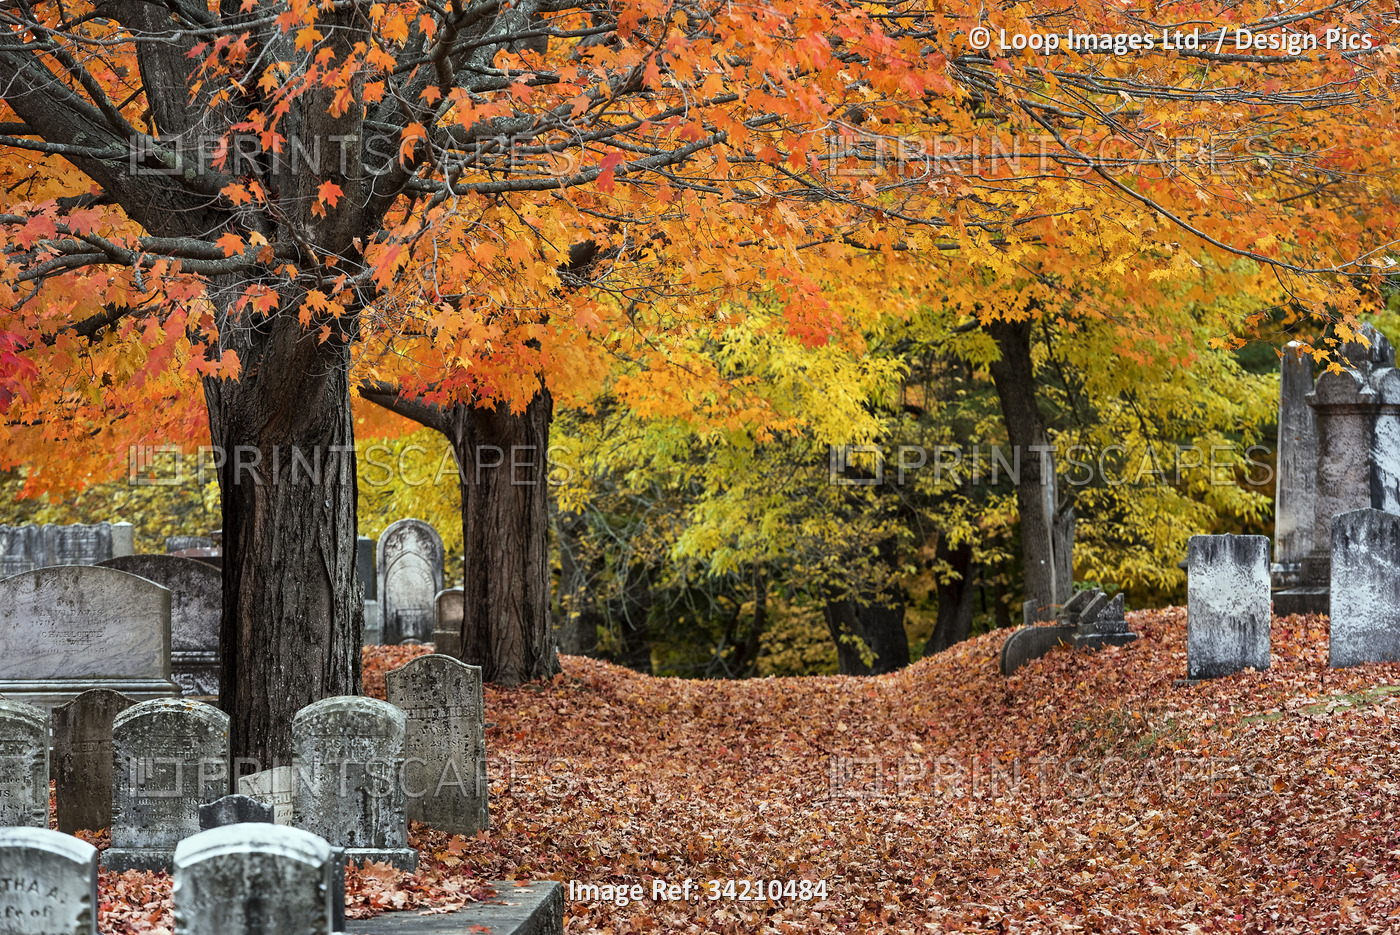 Autumn cemetery in Yarmouth.